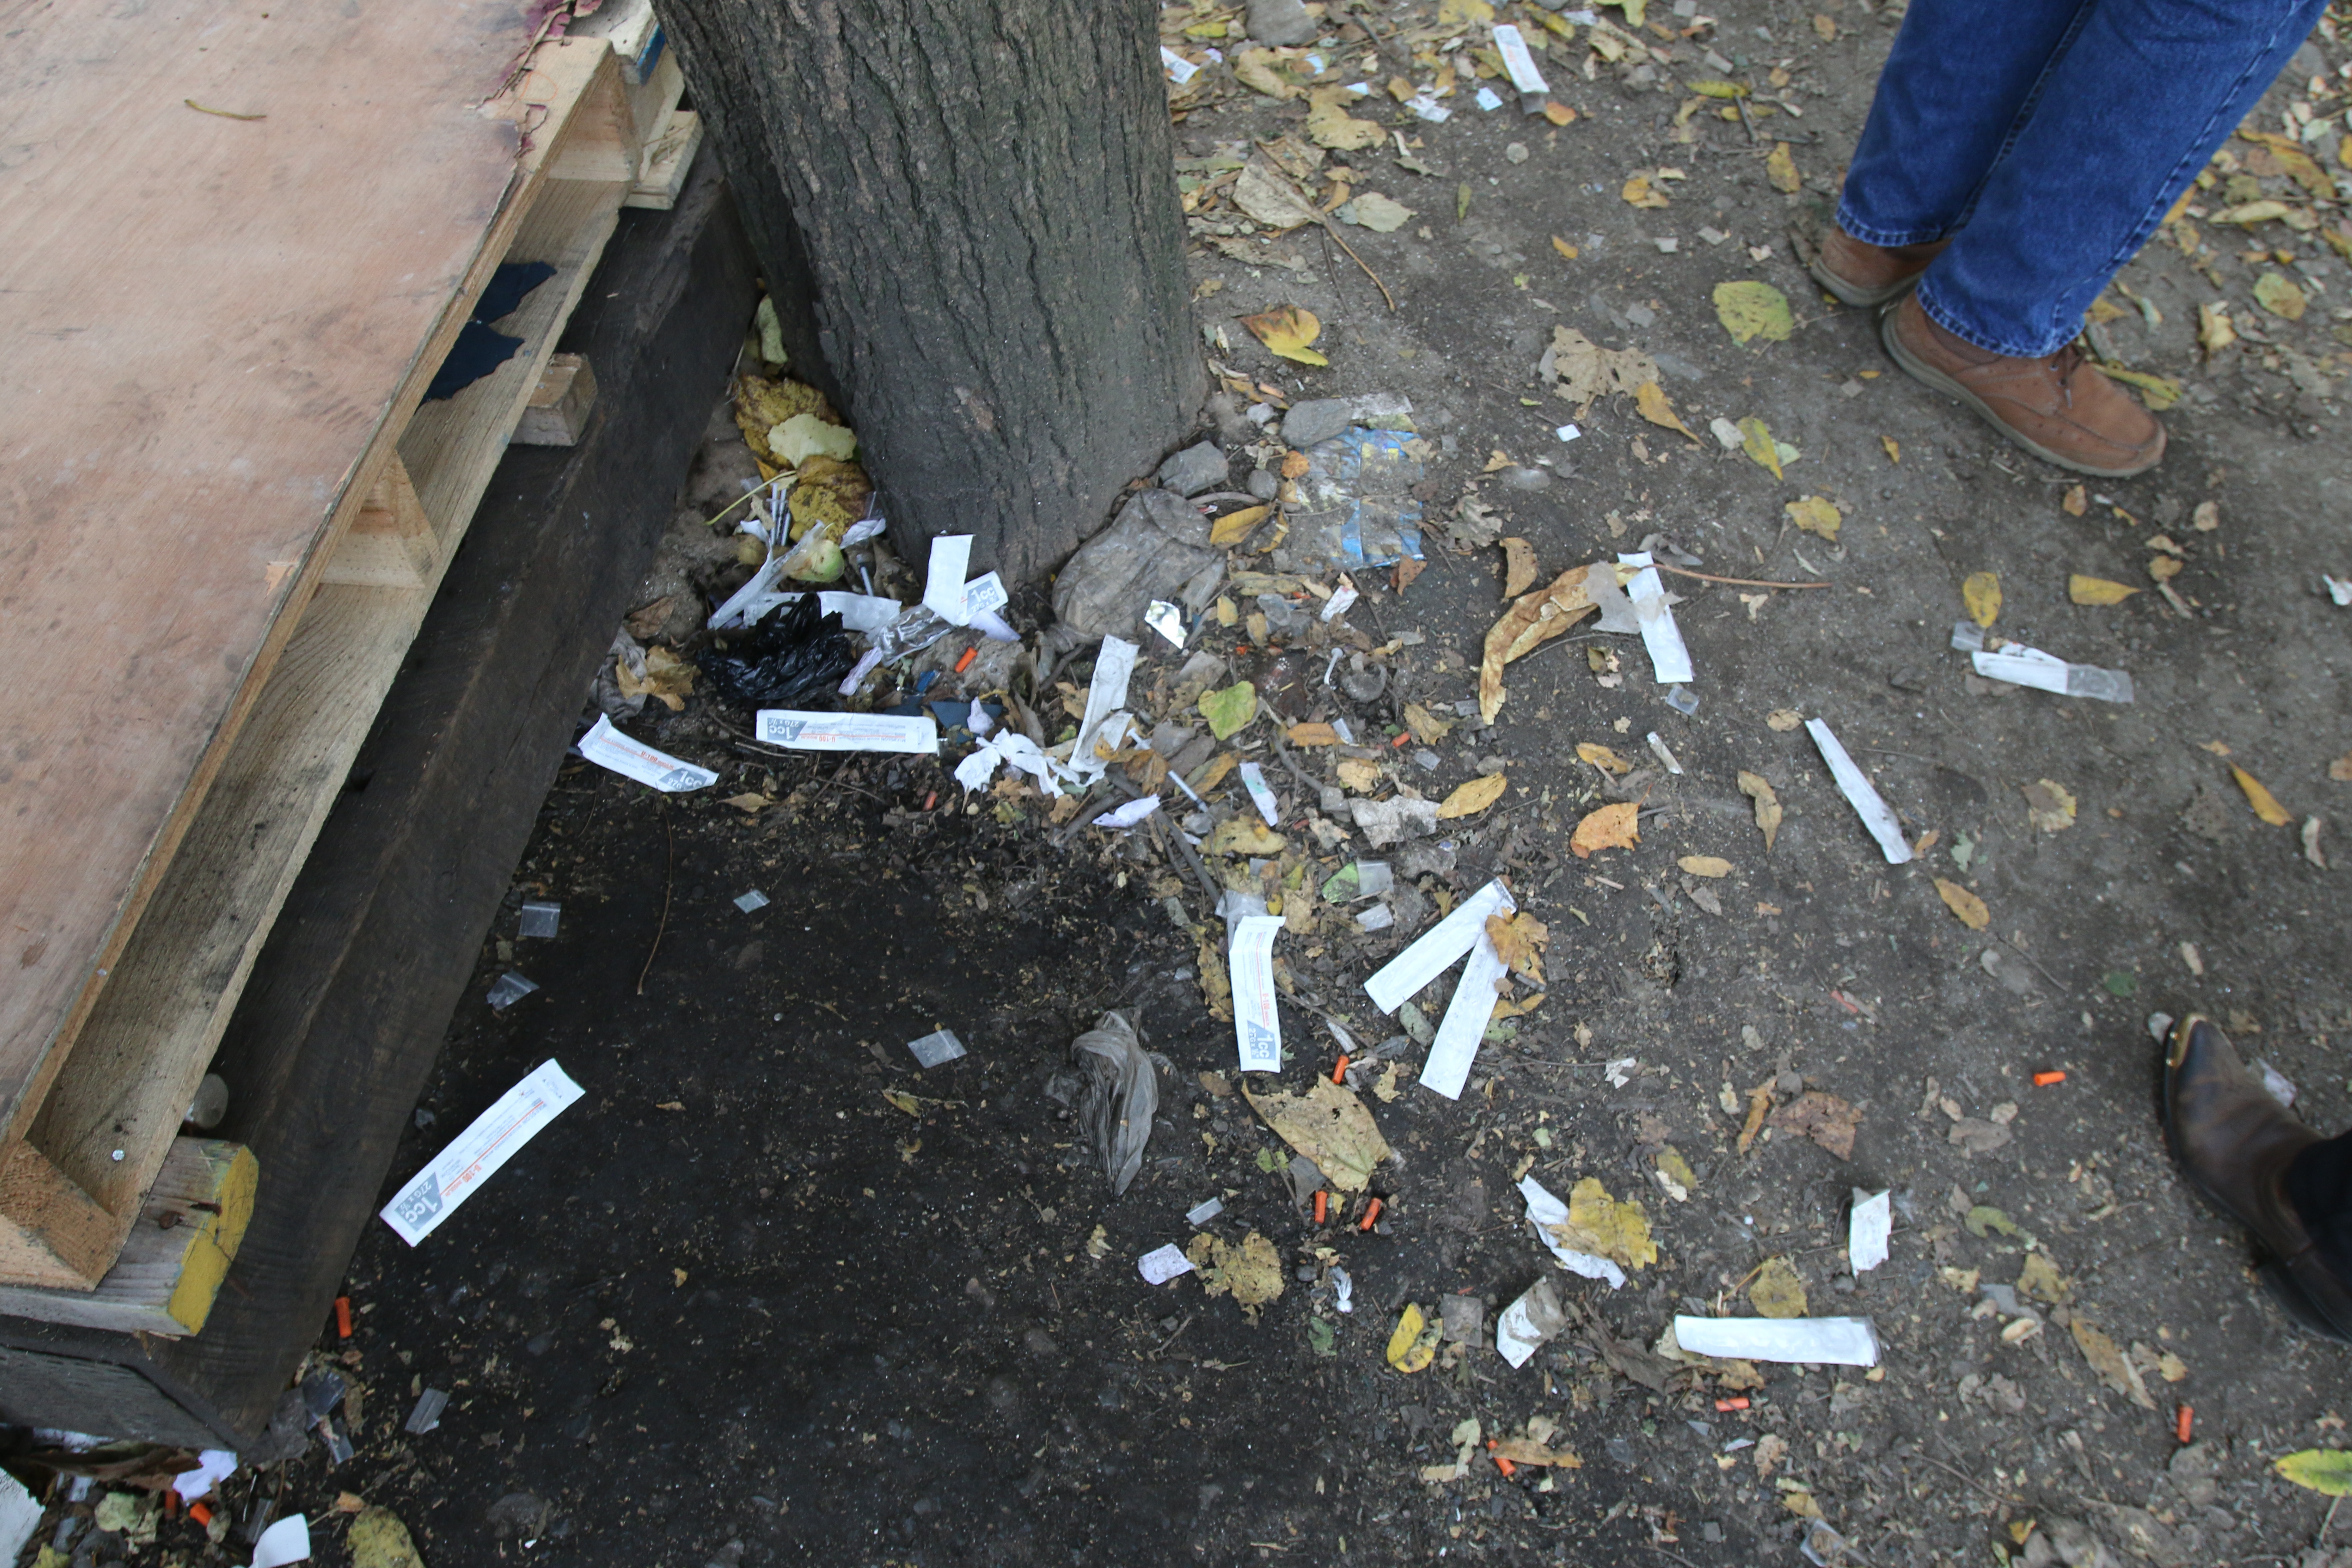 Packages of hypodermic needles (\"works") litter the Conrail railroad tracks that run parallel to Lehigh Avenue. AL DÍA file photo.